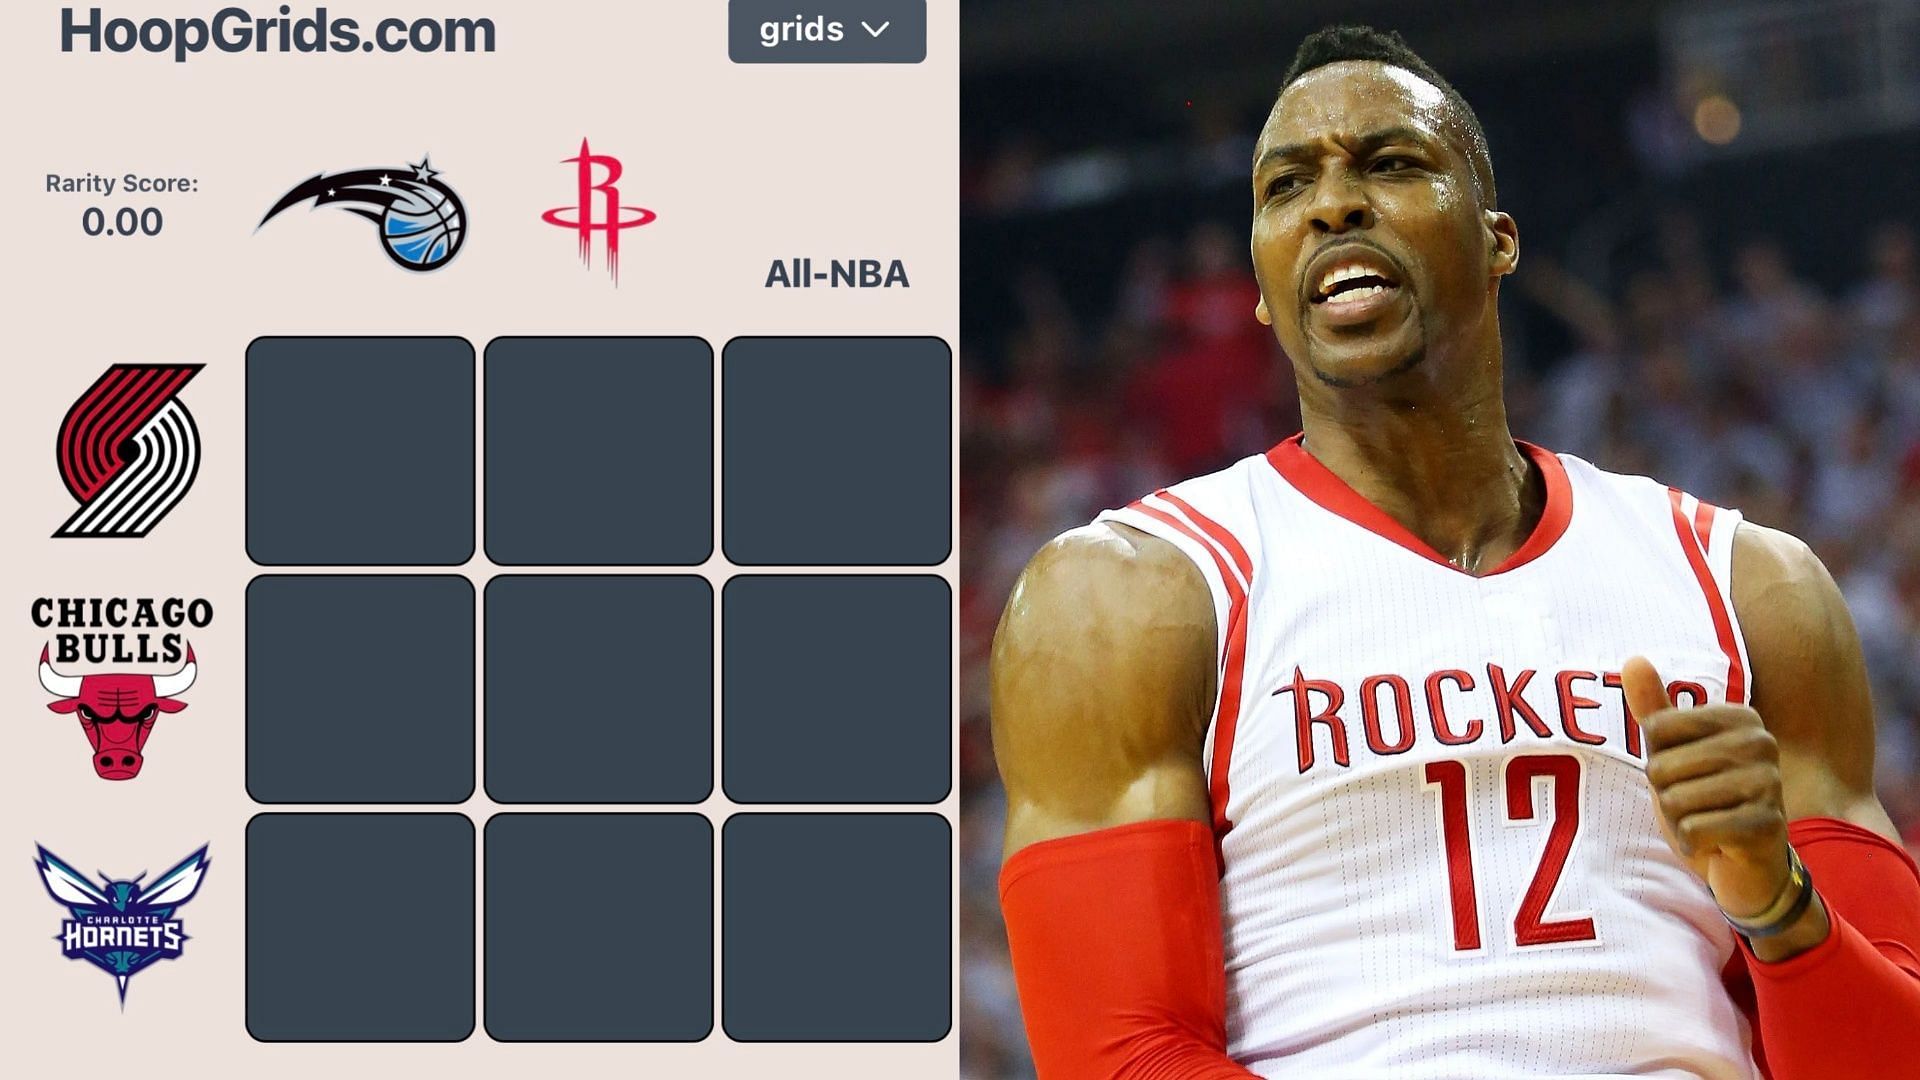 NBA HoopGrids (July 18) and Dwight Howard.